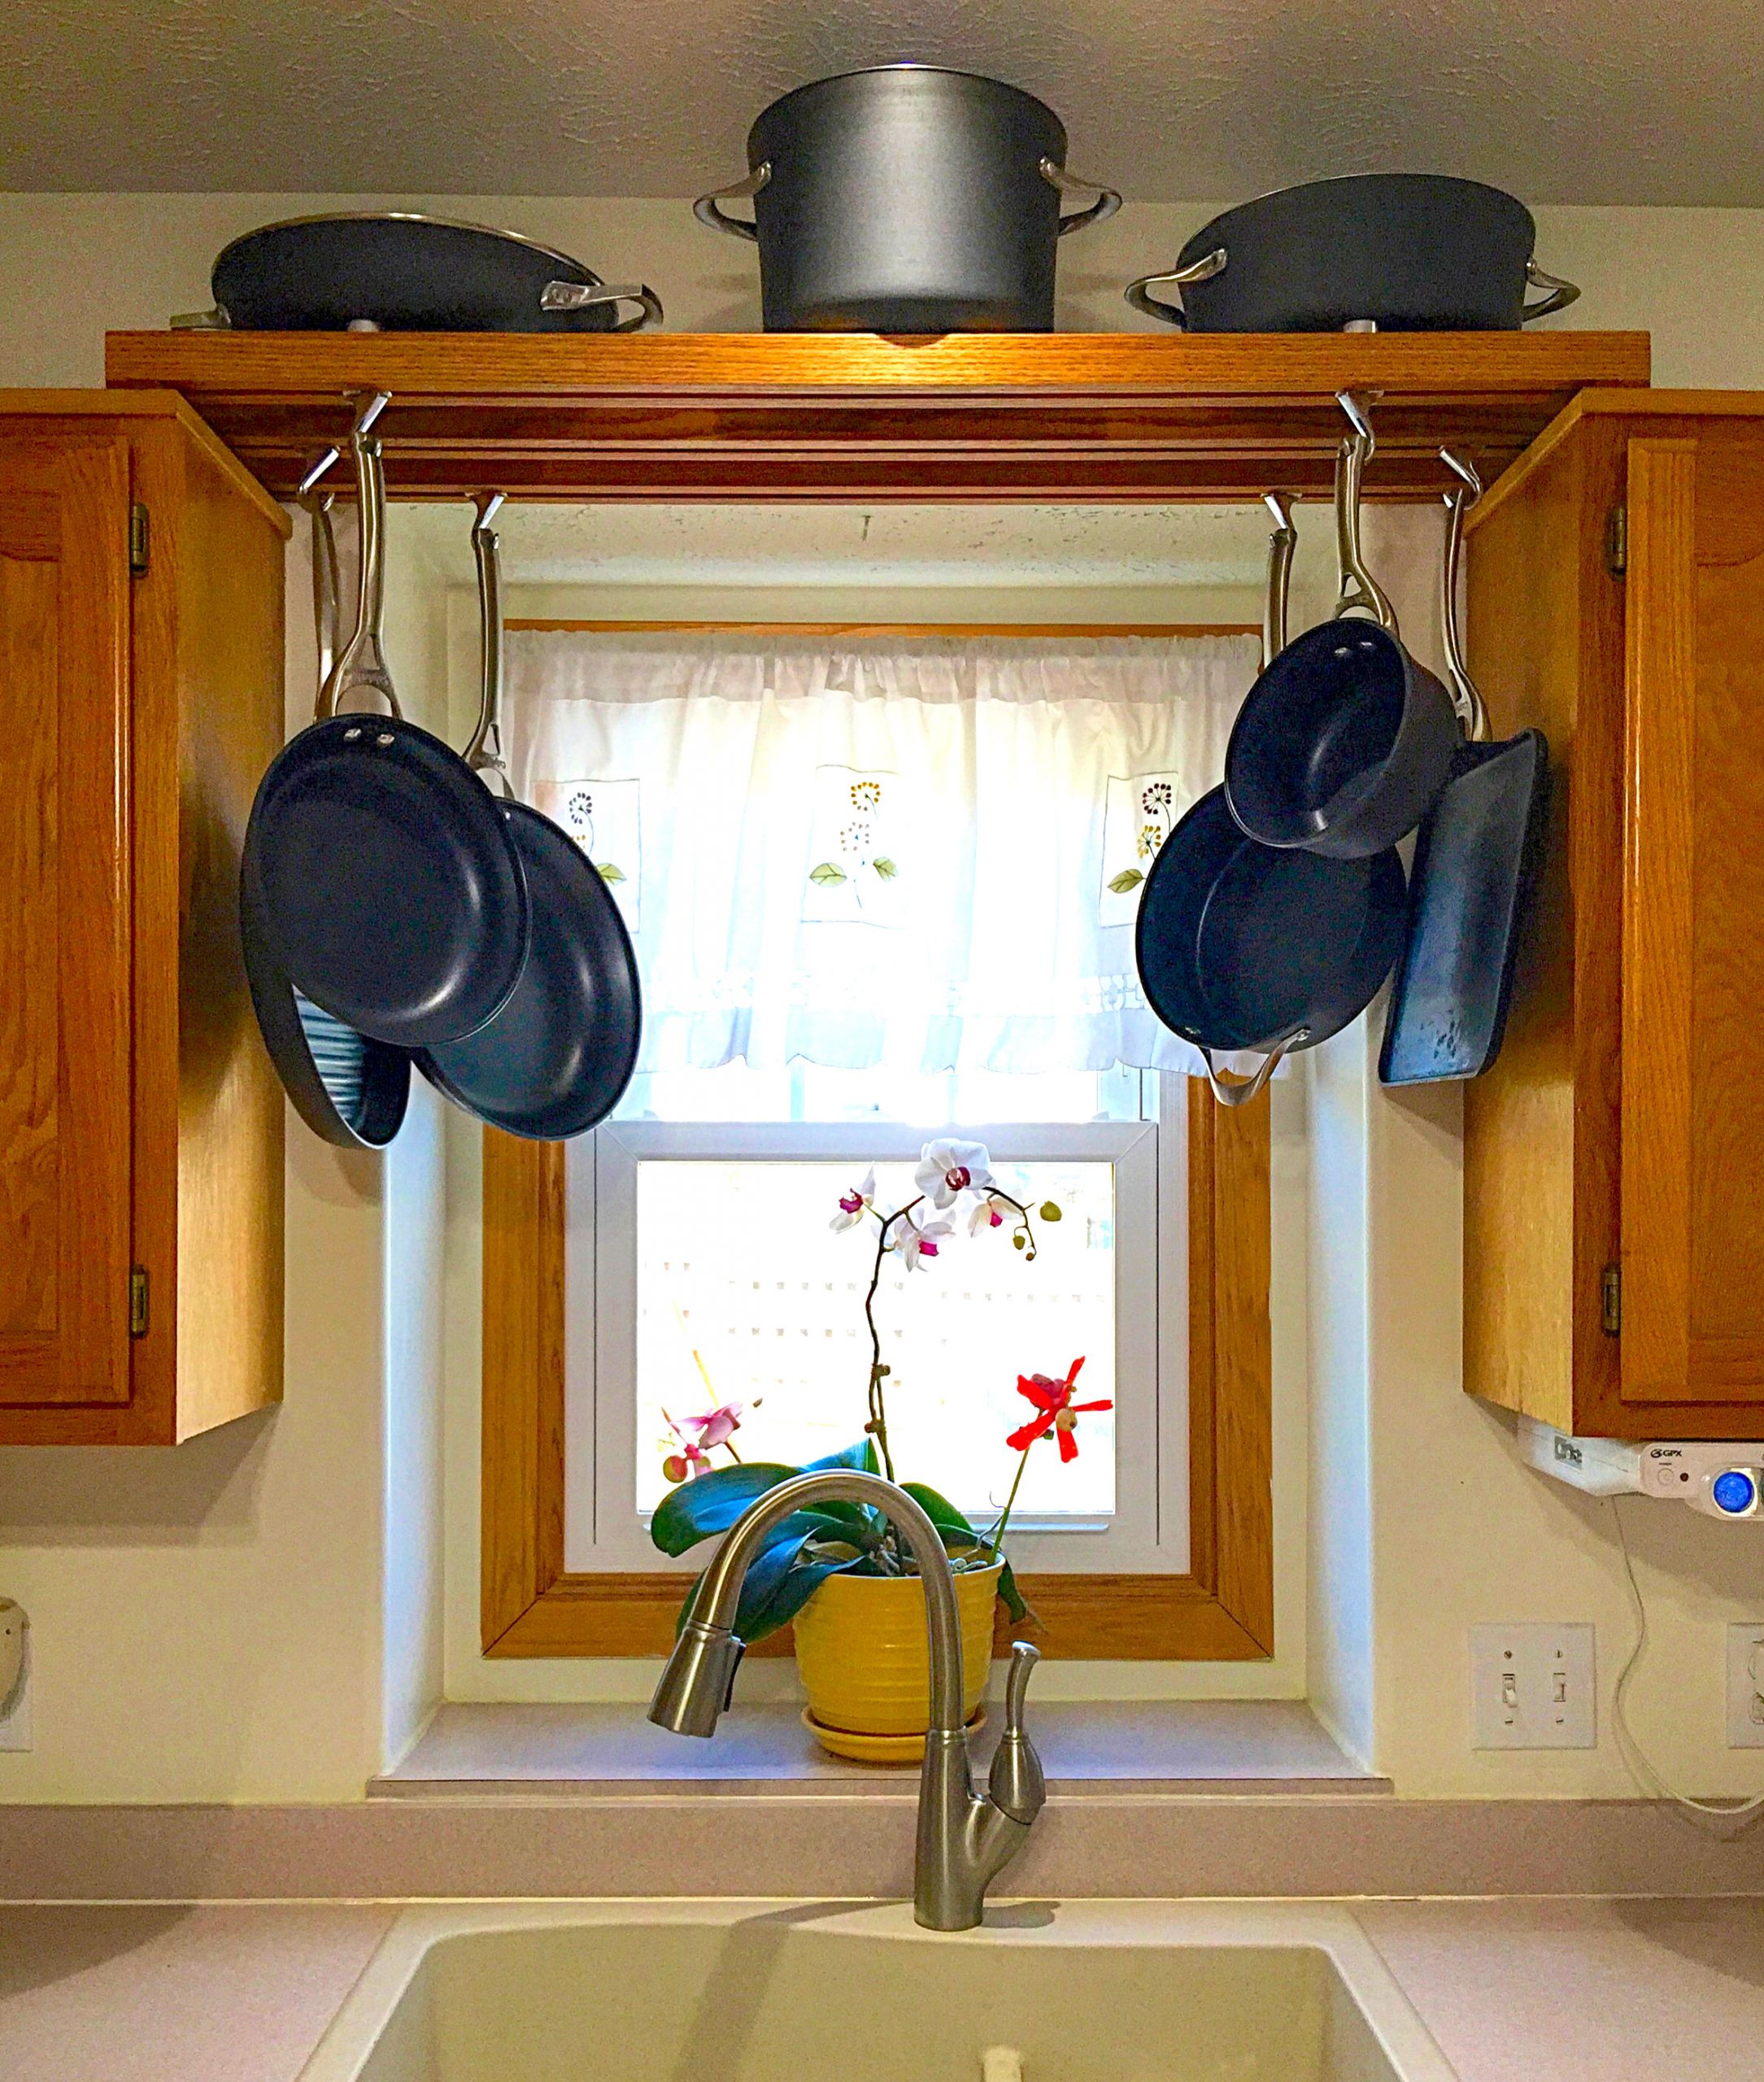 DIY Pots And Pans Organizer
 Make use of space over the kitchen sink with this DIY pot